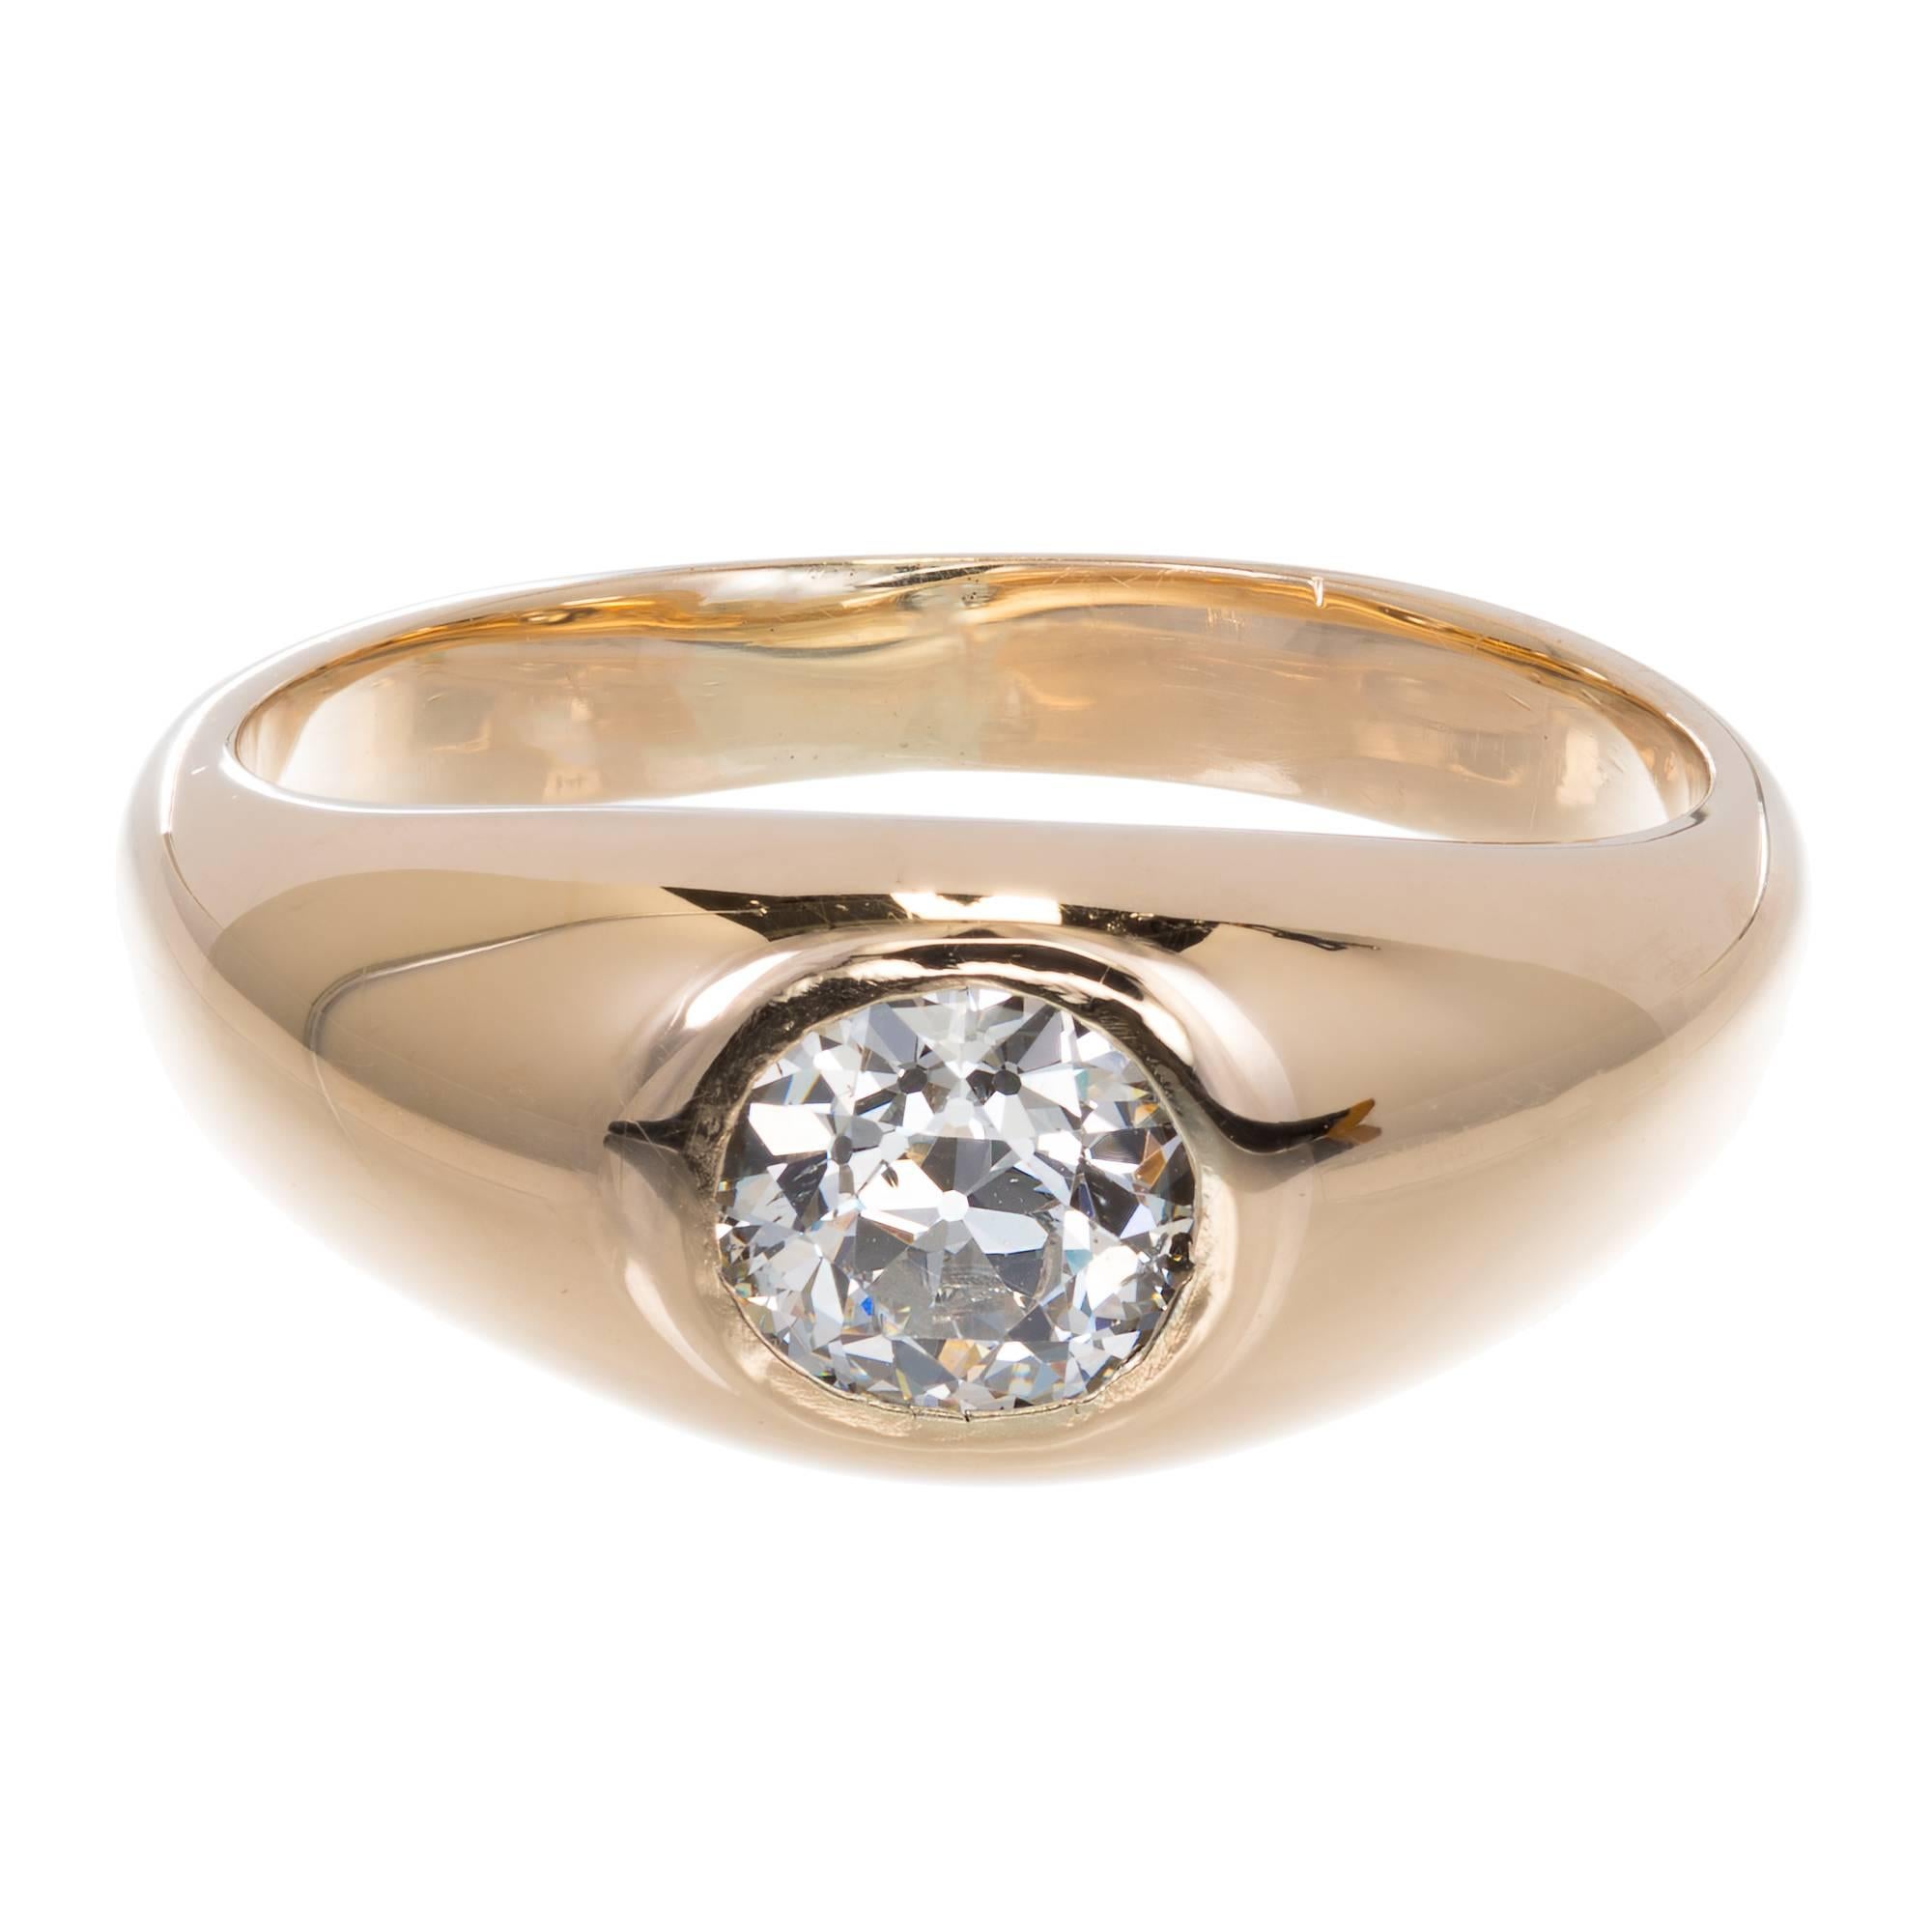 Classic 1900 Victorian simple Gypsy style ring in 14k yellow gold with and extra bright sparkly old European cut Diamond. 

1 old European cut Diamond, approx. total weight .60cts, G – H, SI2, EGL certificate # US314107401D
14k yellow gold
5.5